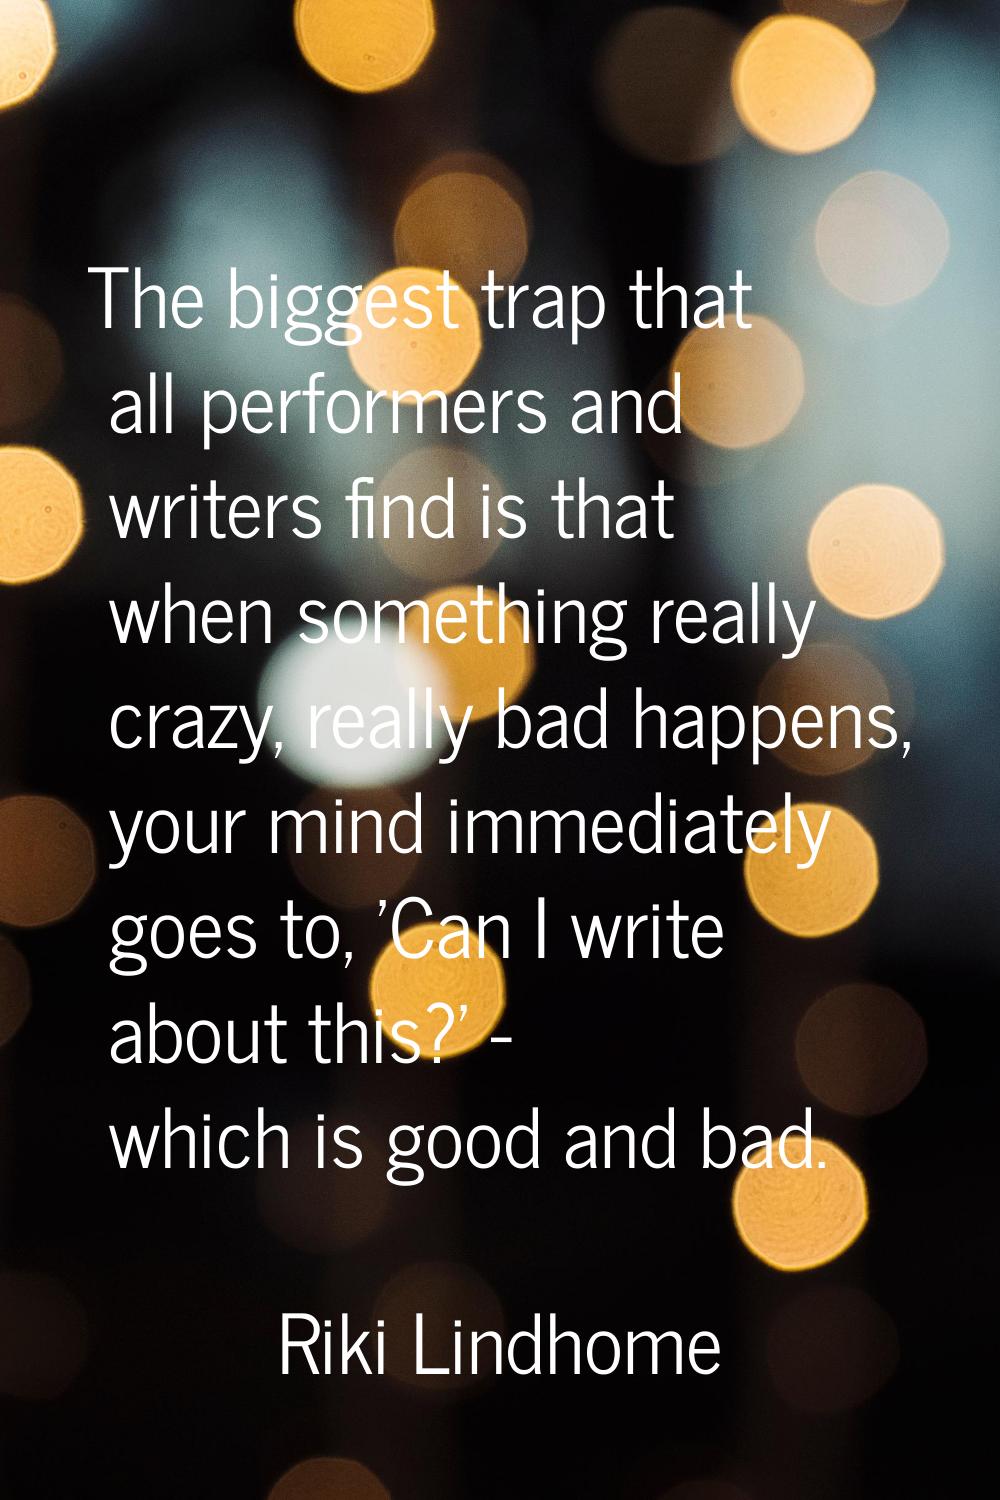 The biggest trap that all performers and writers find is that when something really crazy, really b